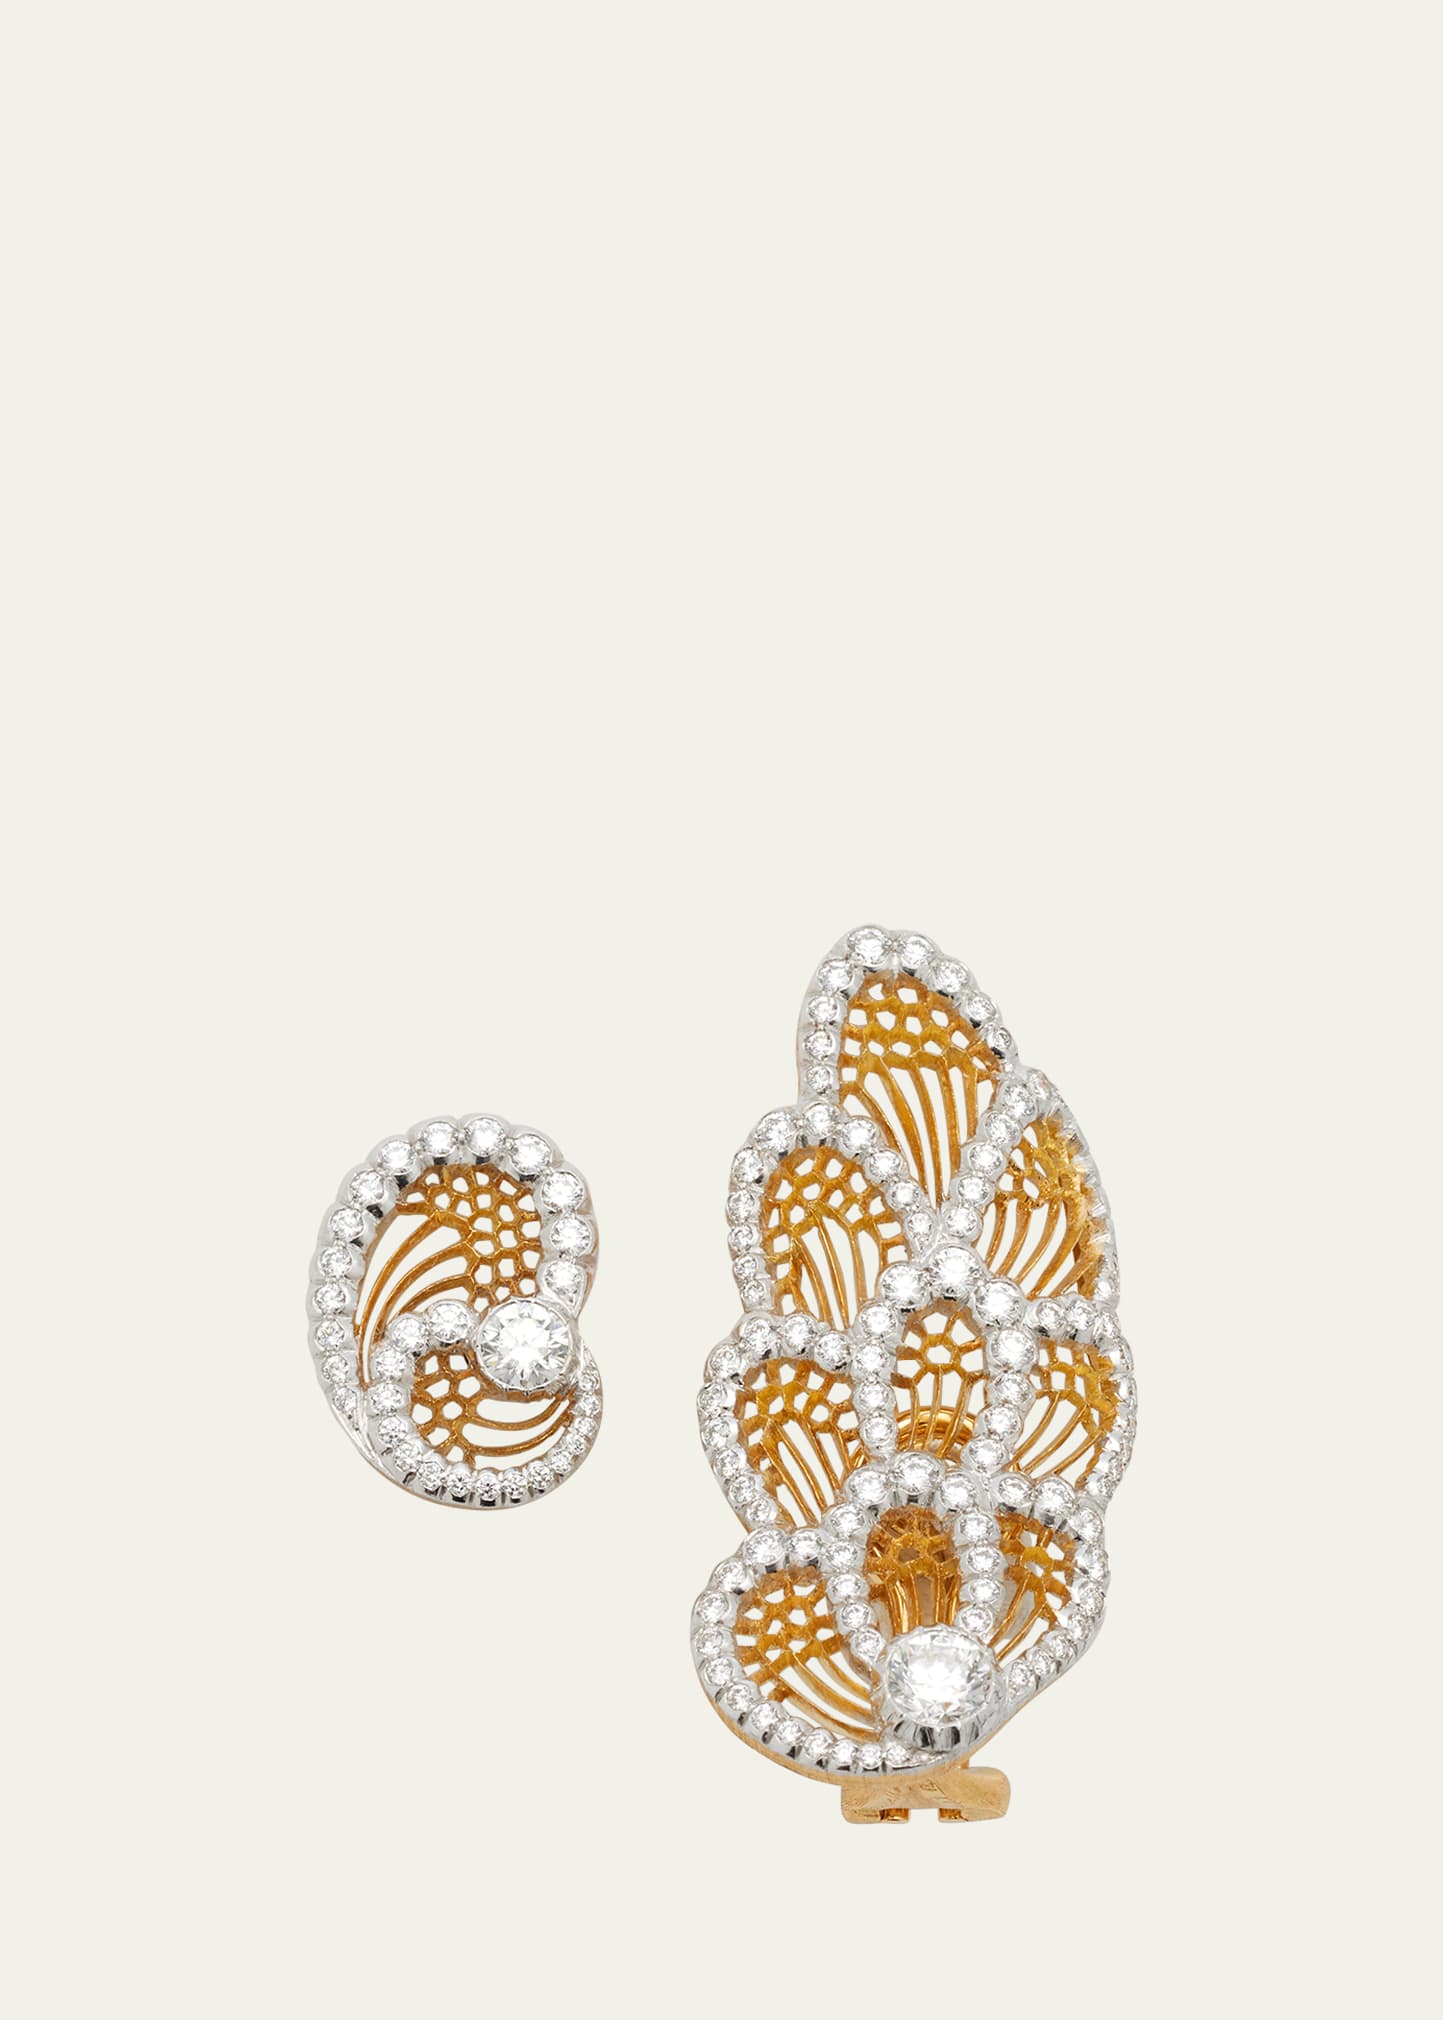 Redon Asymmetric Earrings in Yellow Gold, White Gold and Diamonds